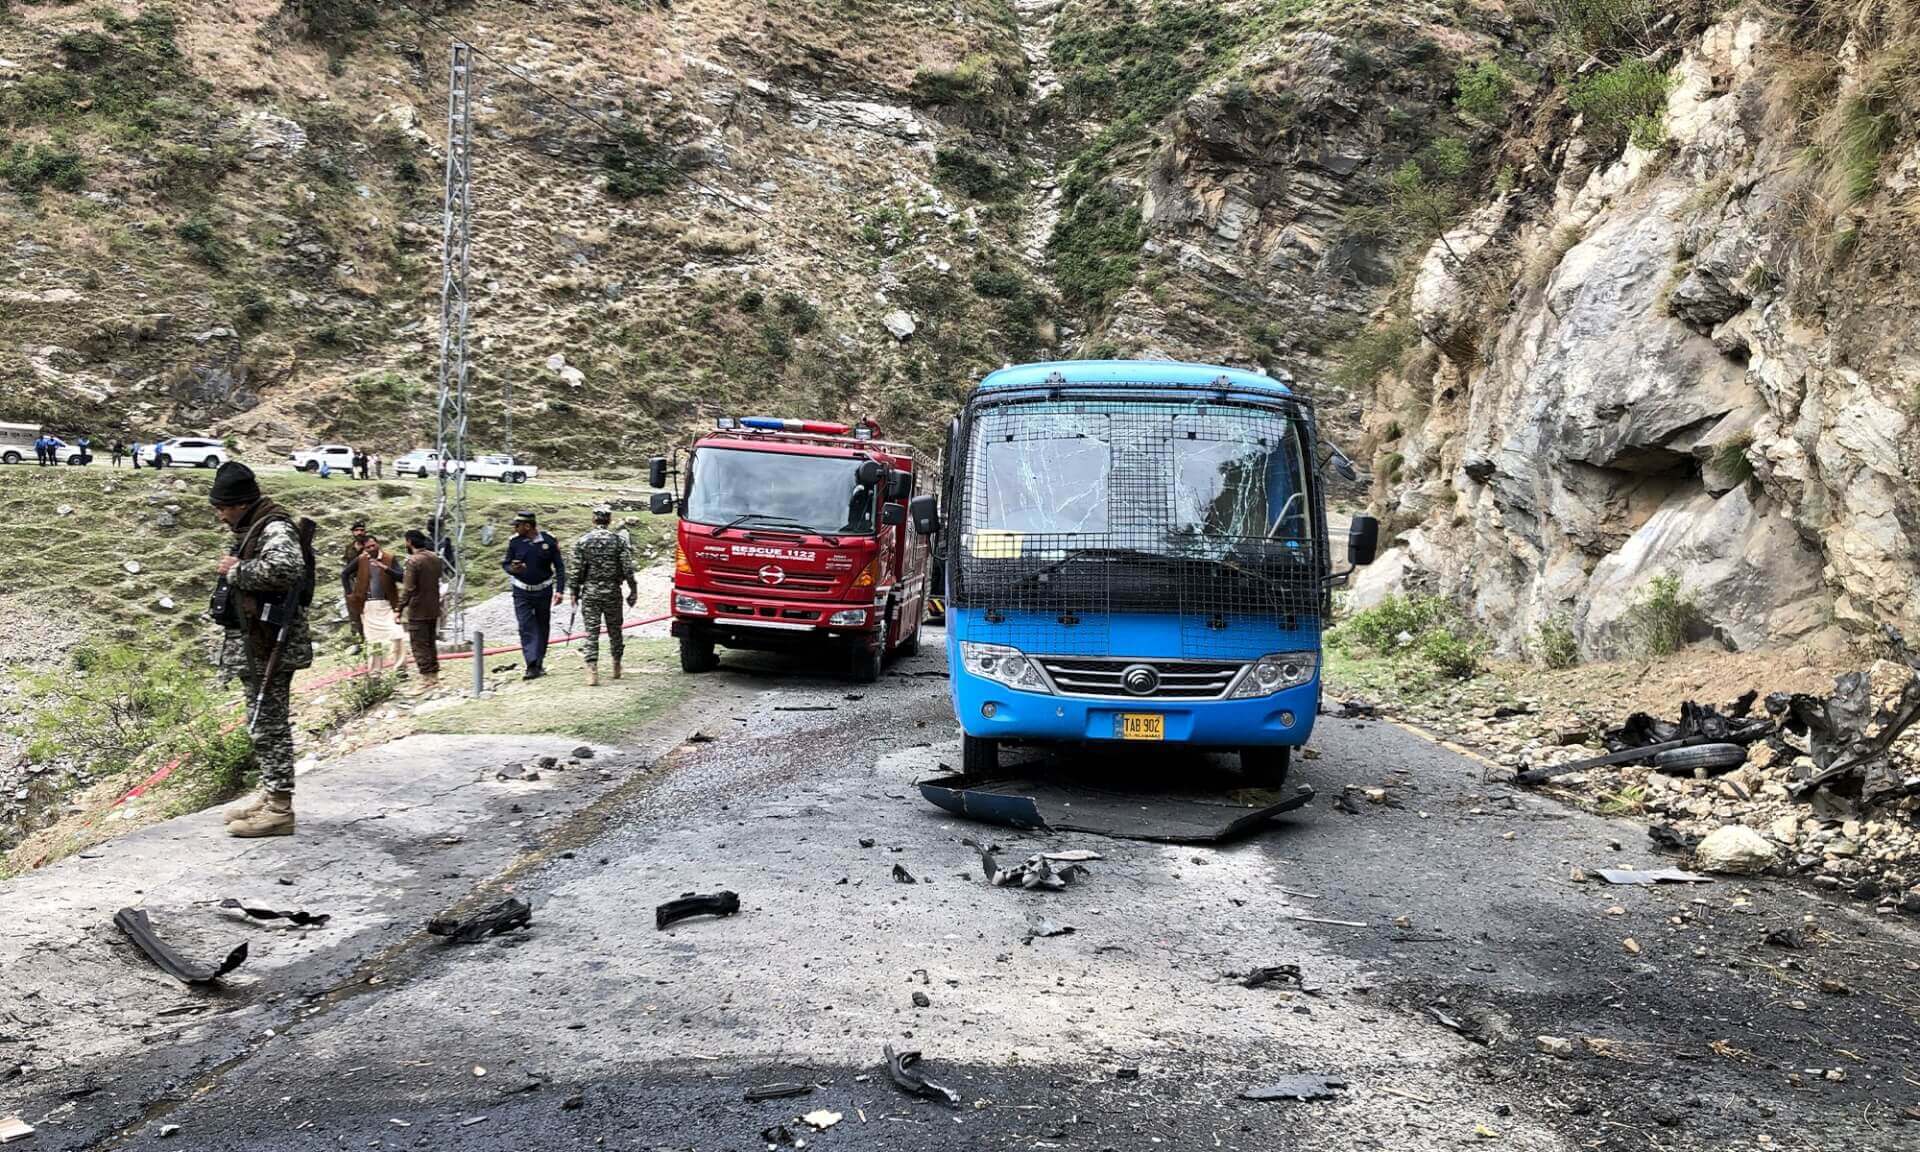 Suicide Bombing Kills Five Chinese Nationals Near Hydroelectric Dam Site in Pakistan